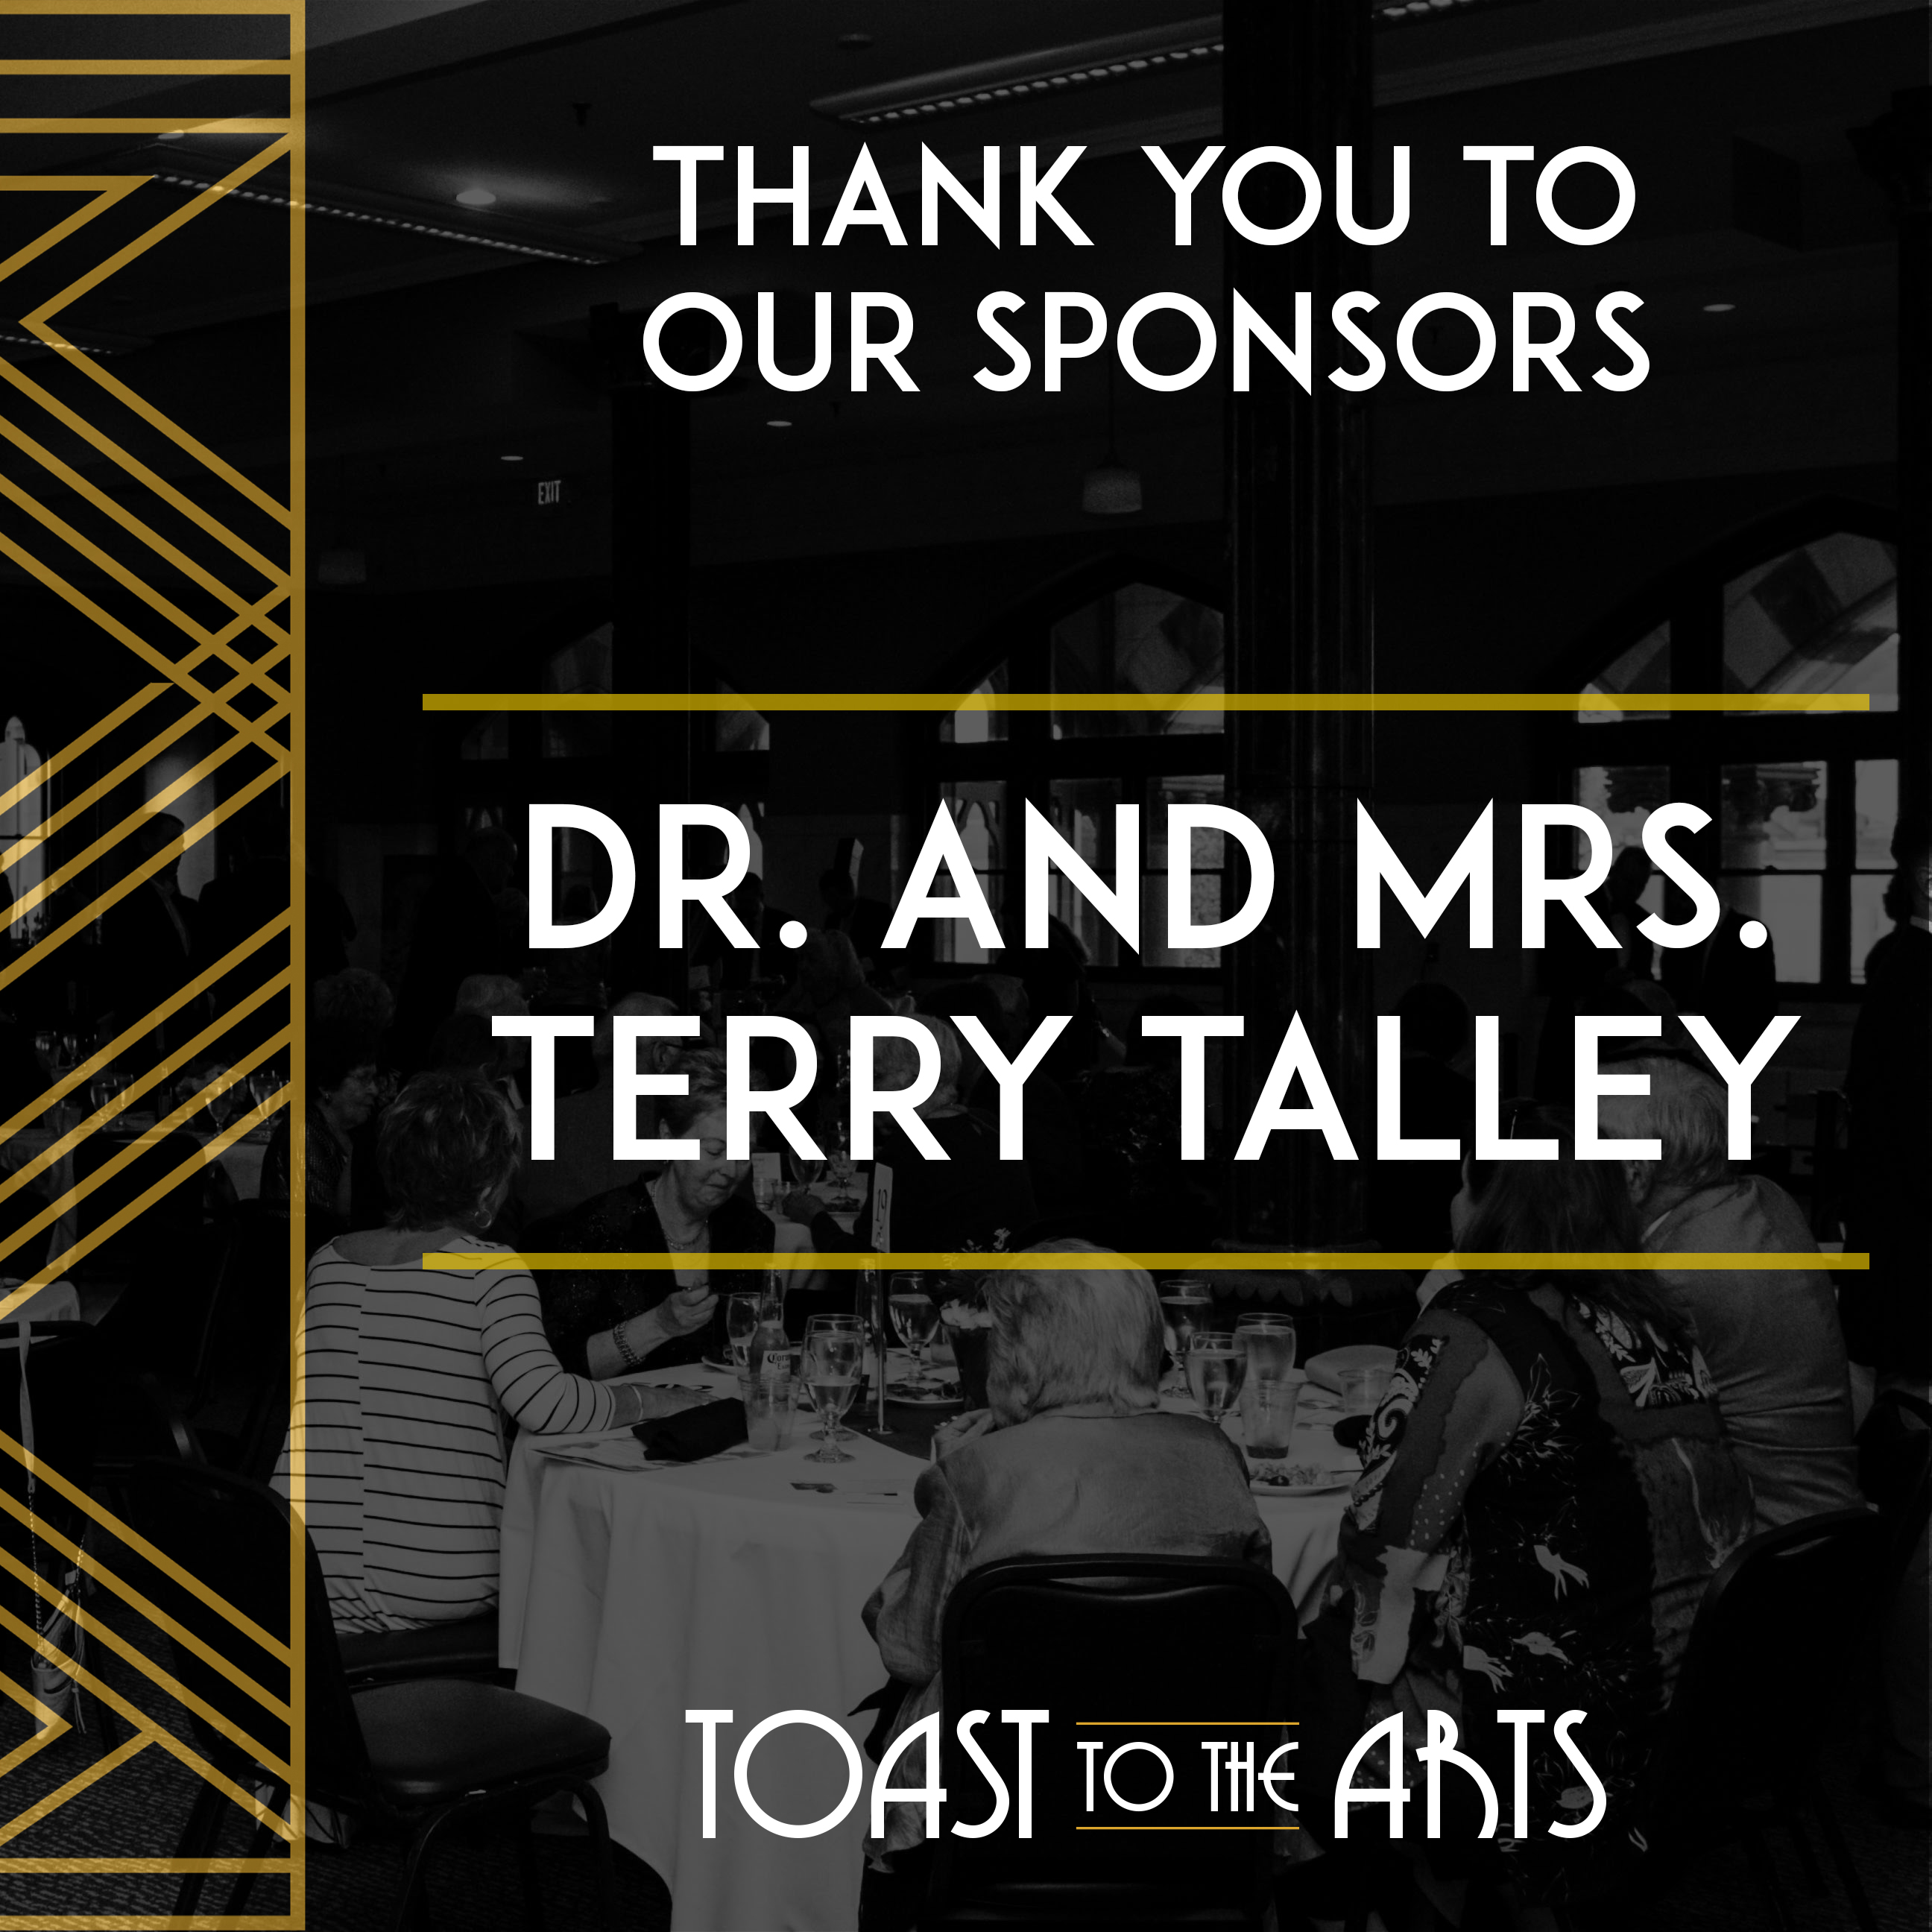 Thank you, Dr. and Mrs. Talley